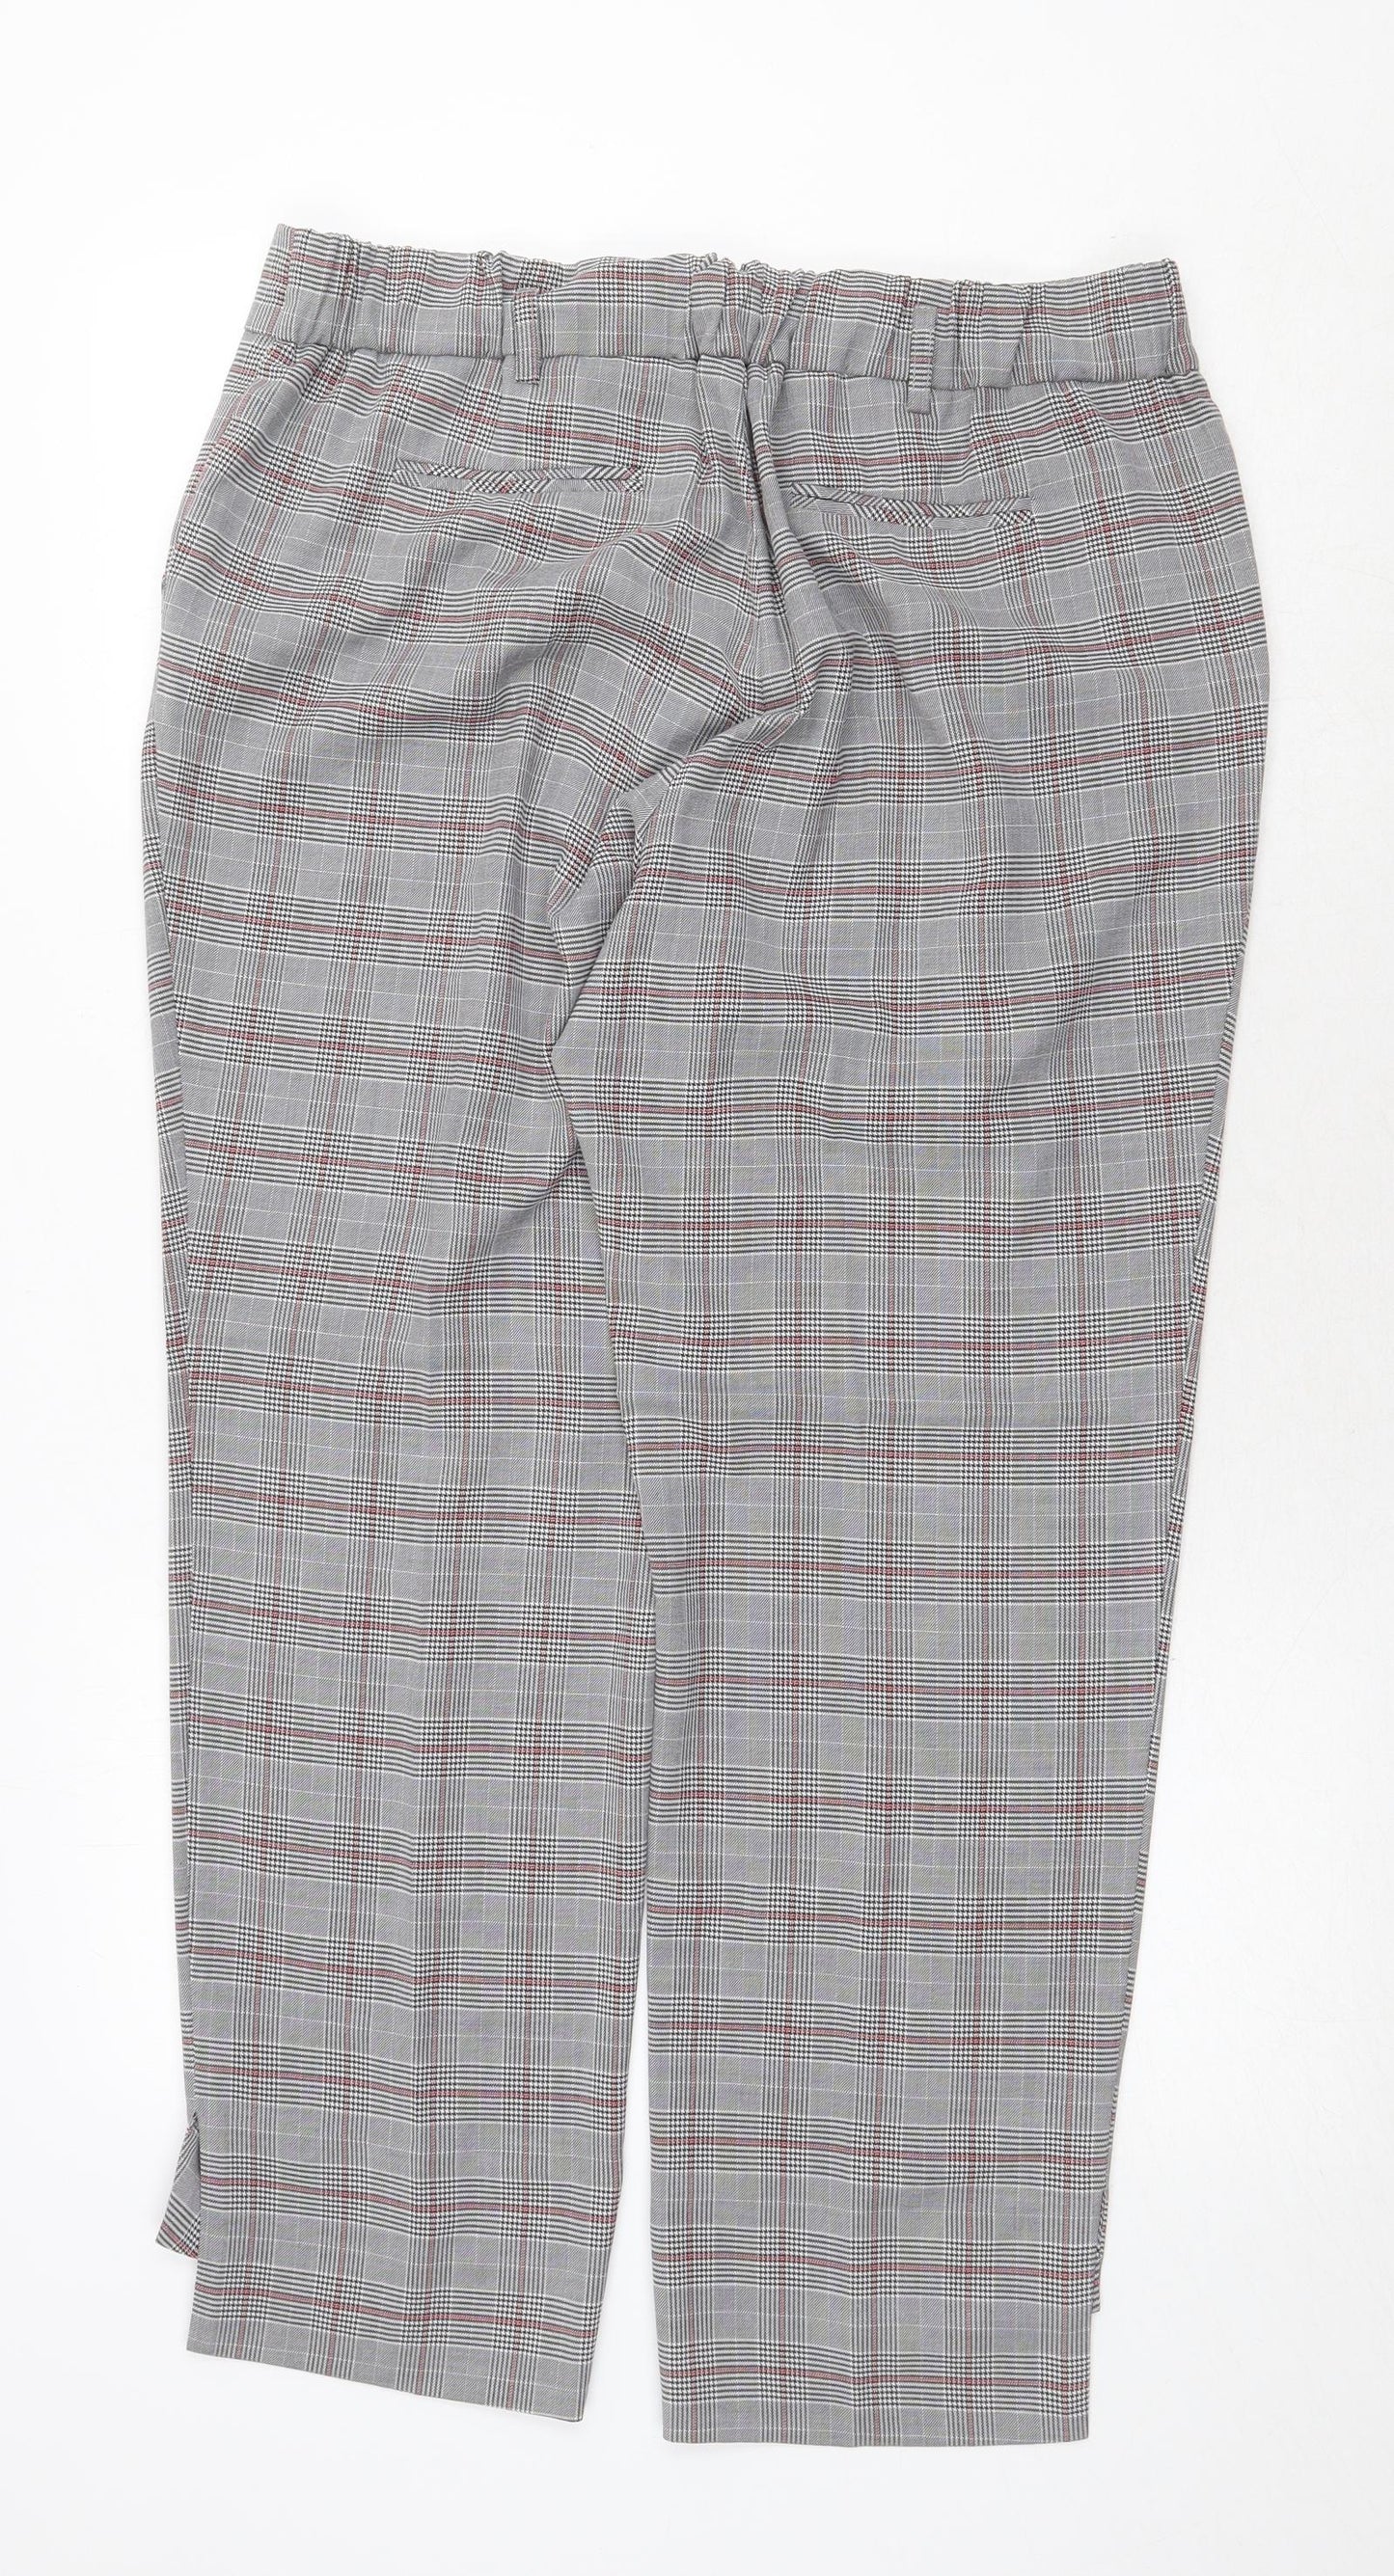 Anthology Womens Grey Plaid Polyester Trousers Size 16 Regular Zip